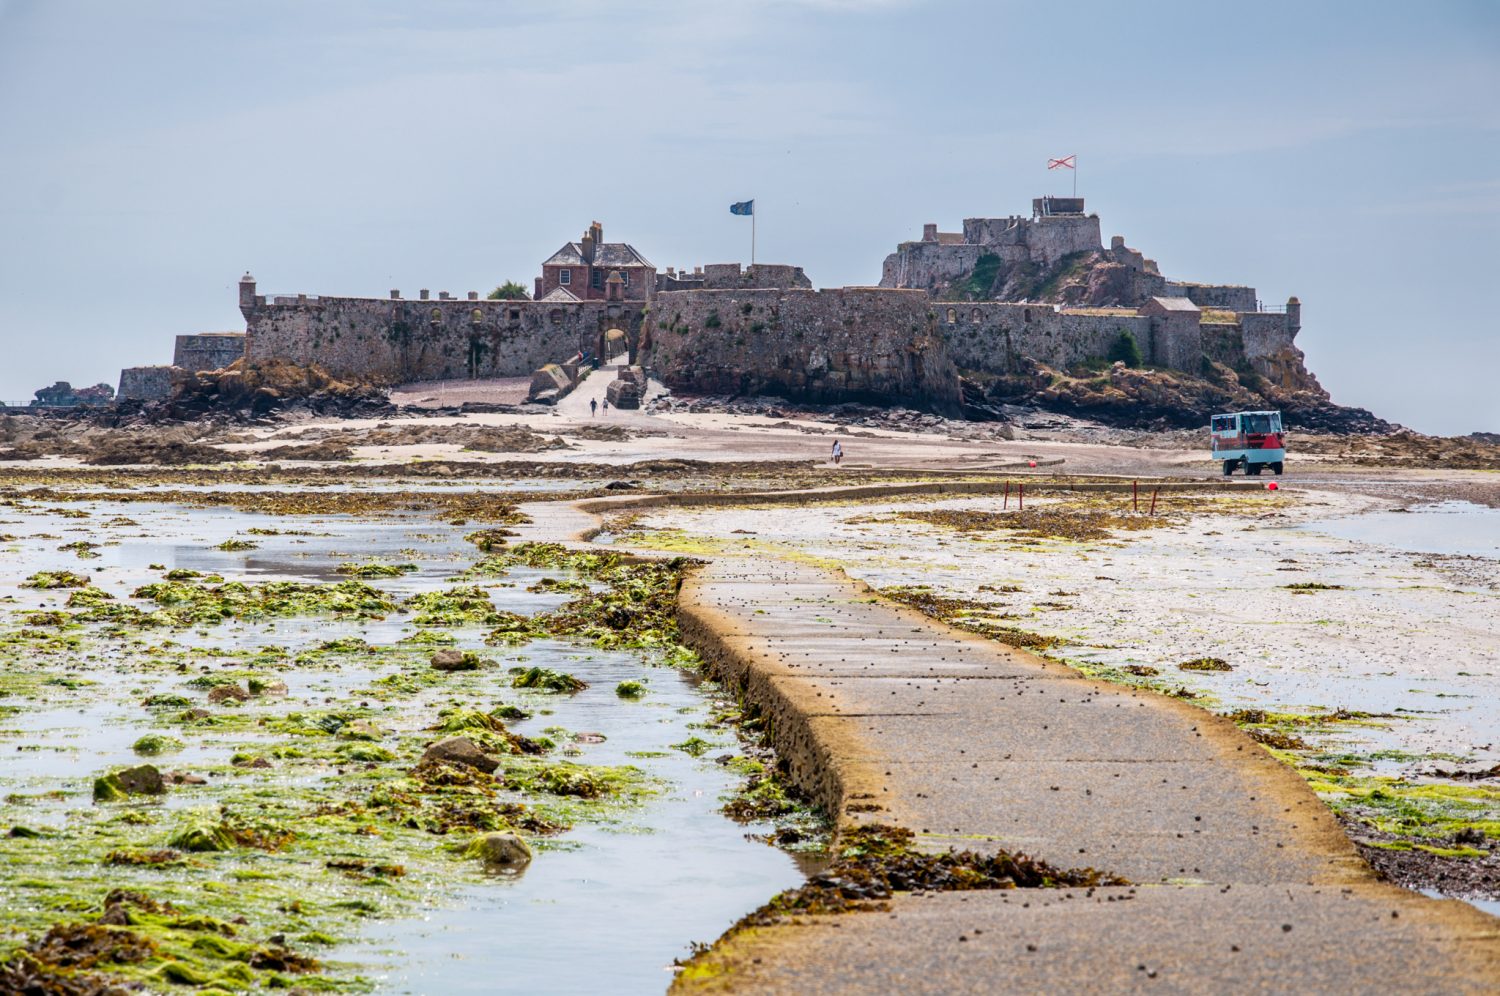 The causeway to Elizabeth Castle lets you walk out during low tides